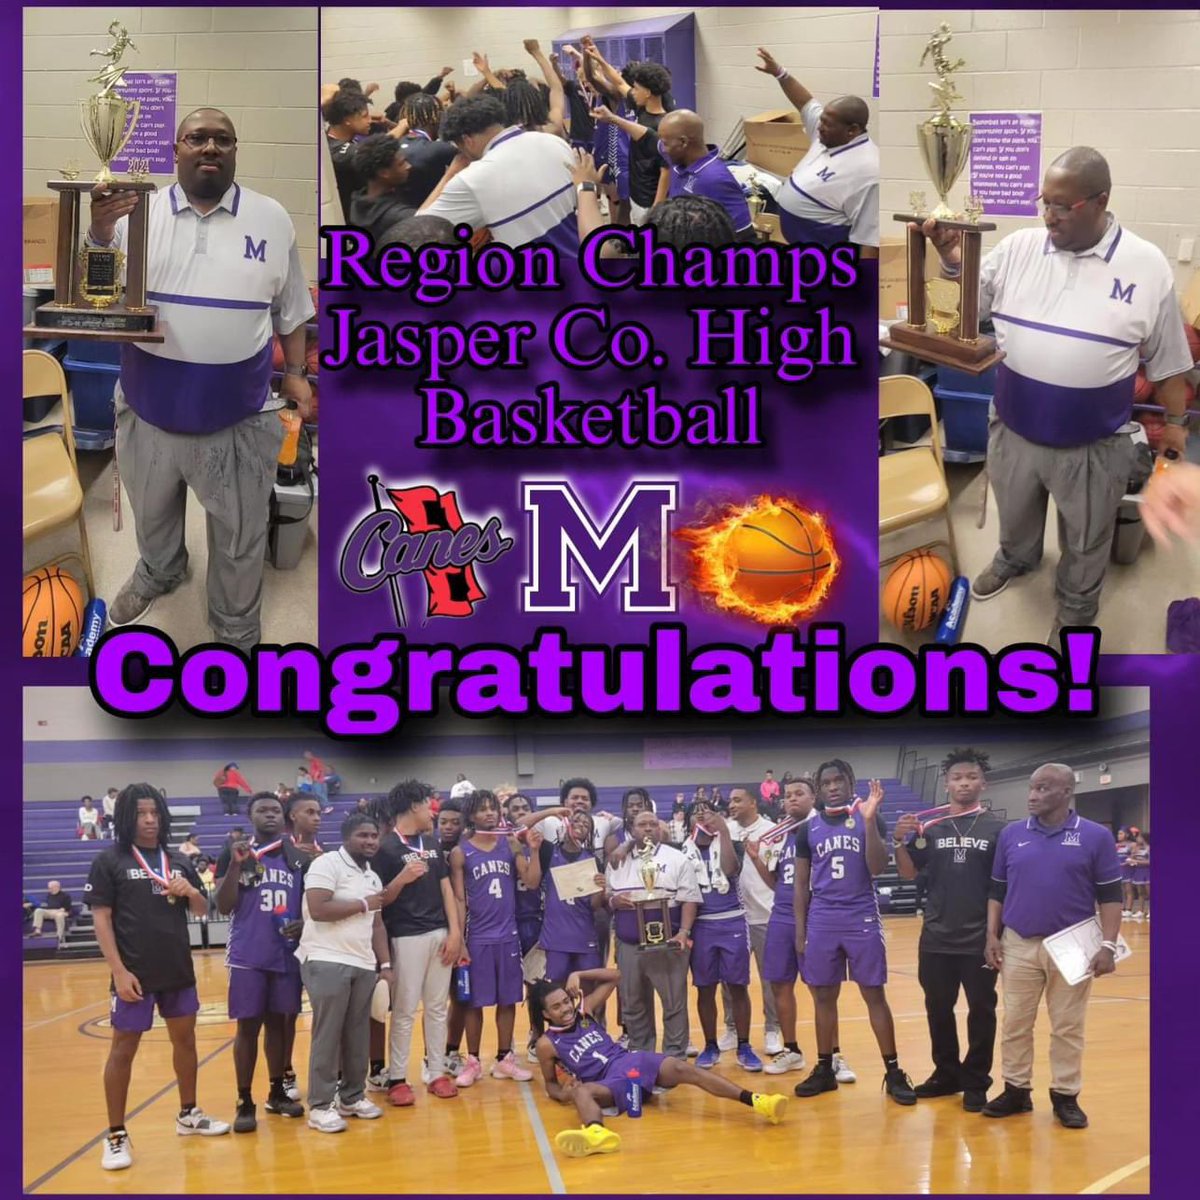 The boys season come to and end after loosing a tough game to #2 Paideia 56-47. Didn’t do the little things the whole game but we’ll learn from them and get better next year. Nothing to hang our heads on about this year: Region Champs and Sweet 16. This team made HISTORY!!!